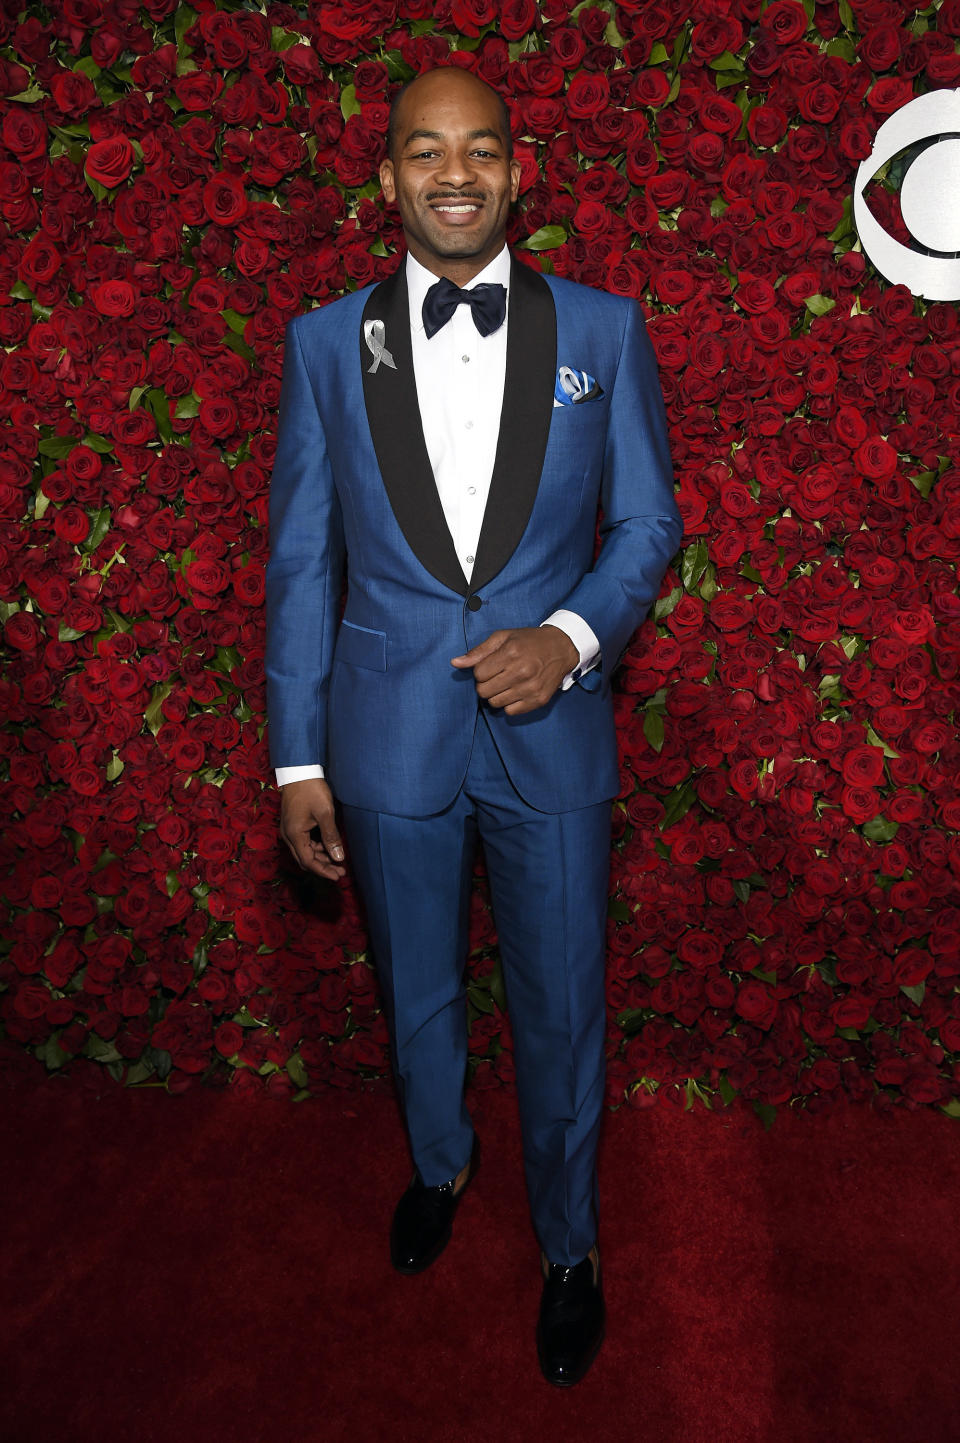 NEW YORK, NY - JUNE 12:  Actor Brandon Victor Dixon attends the 70th Annual Tony Awards at The Beacon Theatre on June 12, 2016 in New York City.  (Photo by Kevin Mazur/Getty Images for Tony Awards Productions)